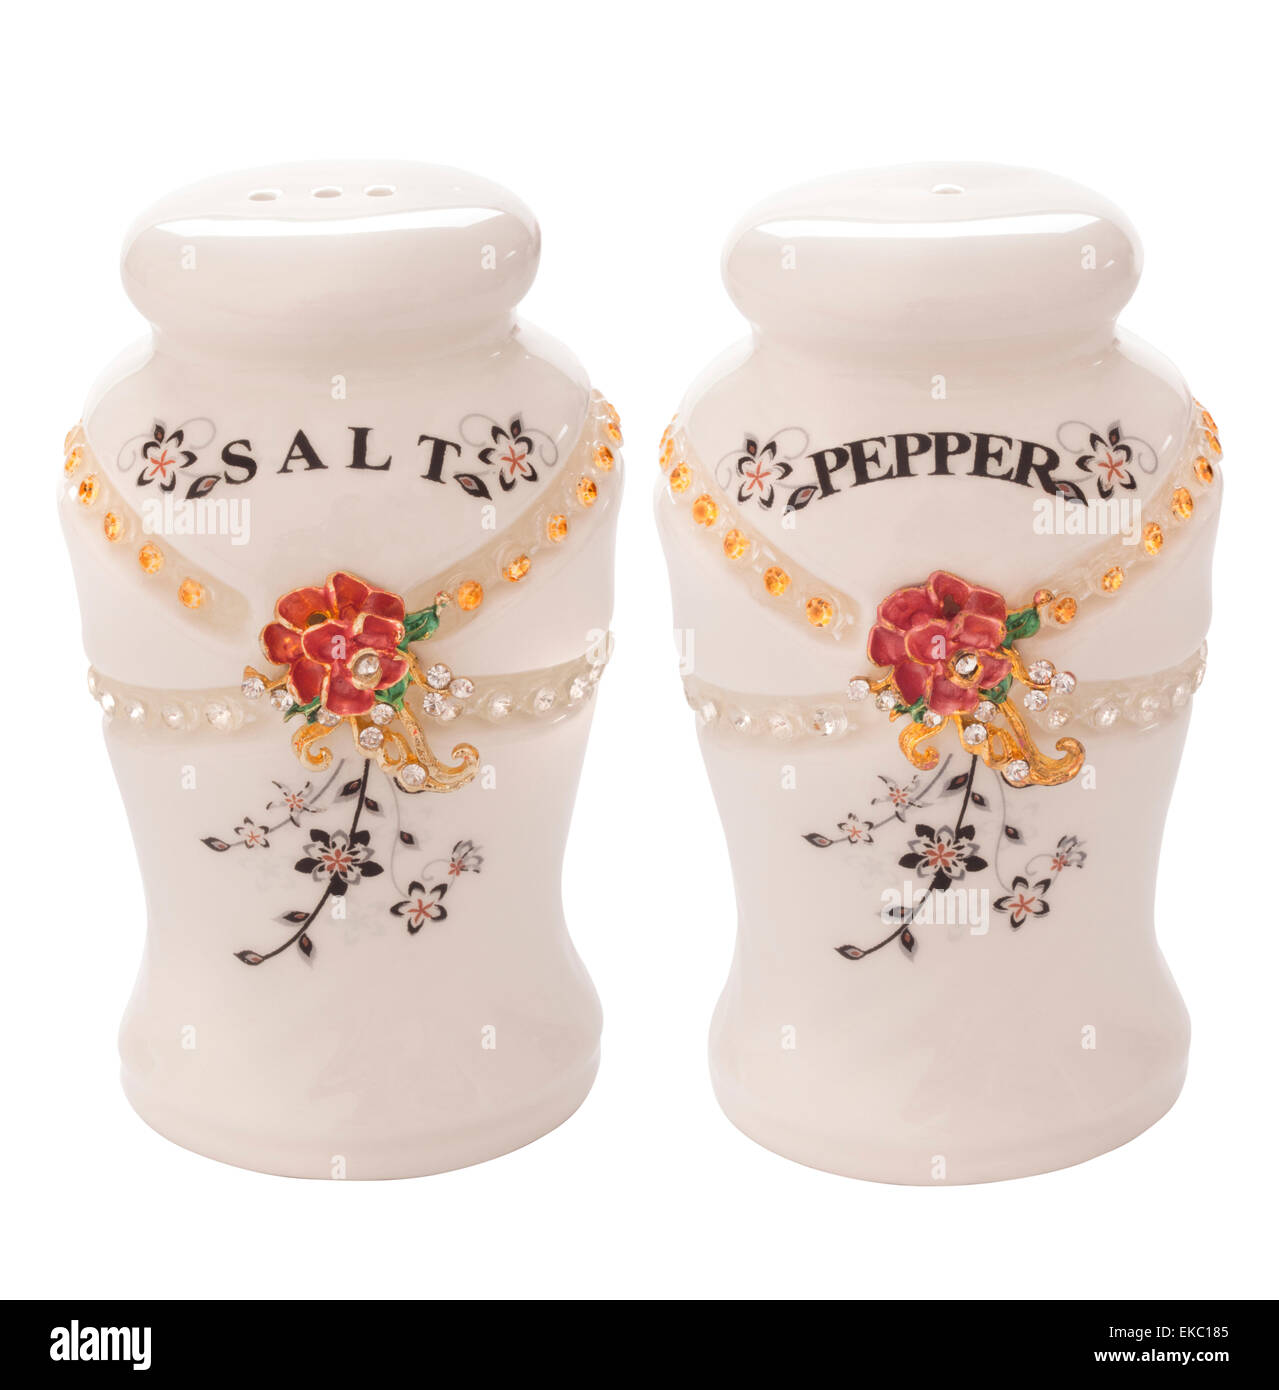 salt and pepper shakers Stock Photo